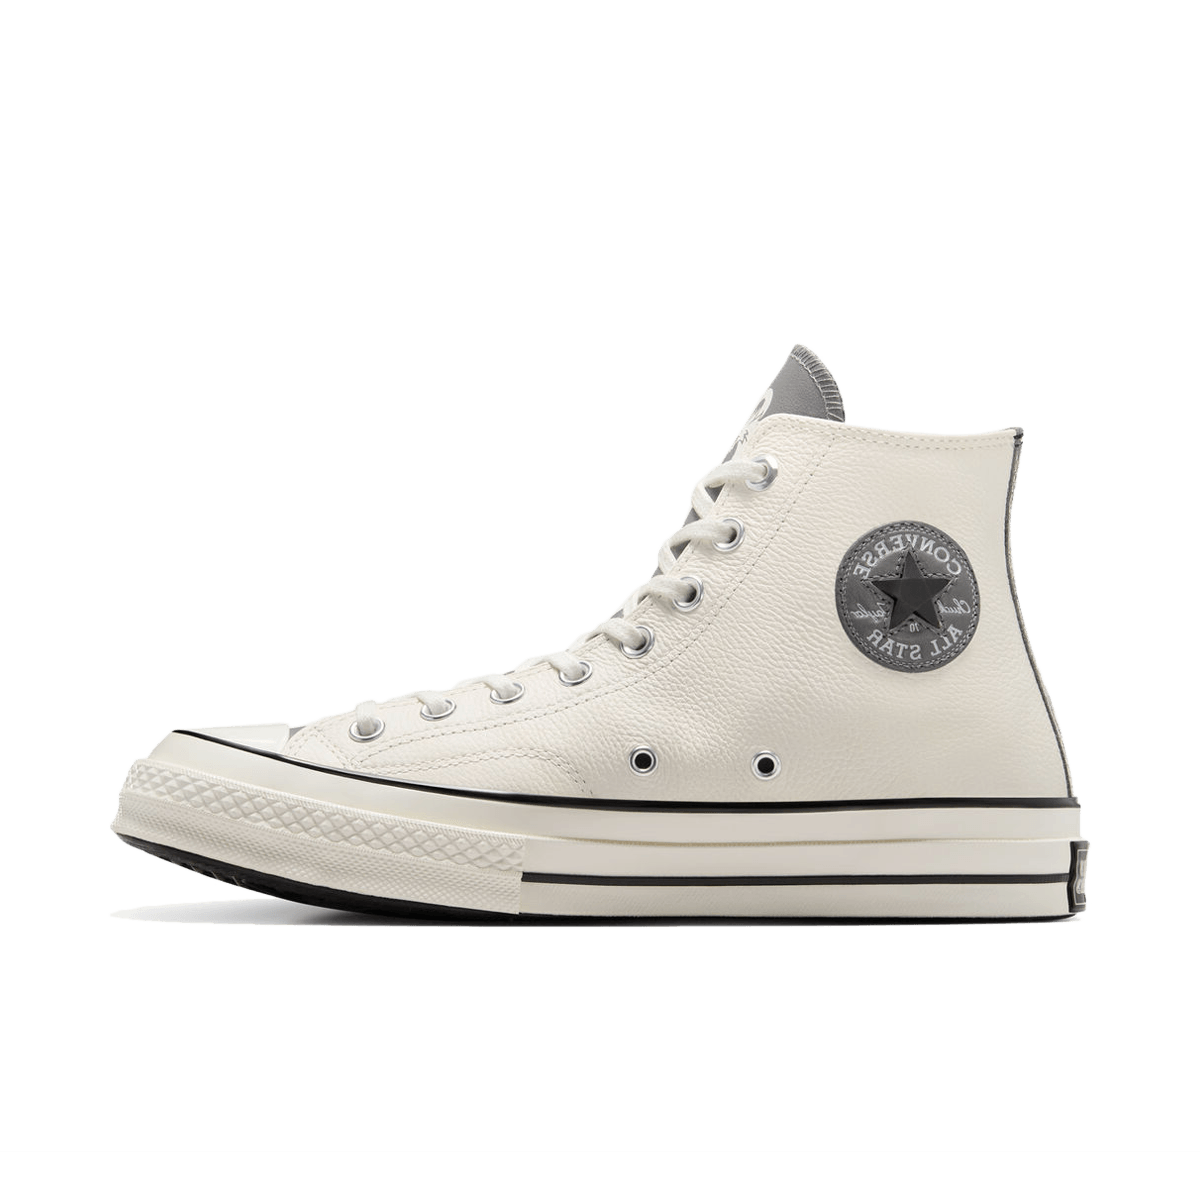 Dungeons & Dragons x Converse Chuck 70 Leather 'The Dice Taketh Away' A09884C